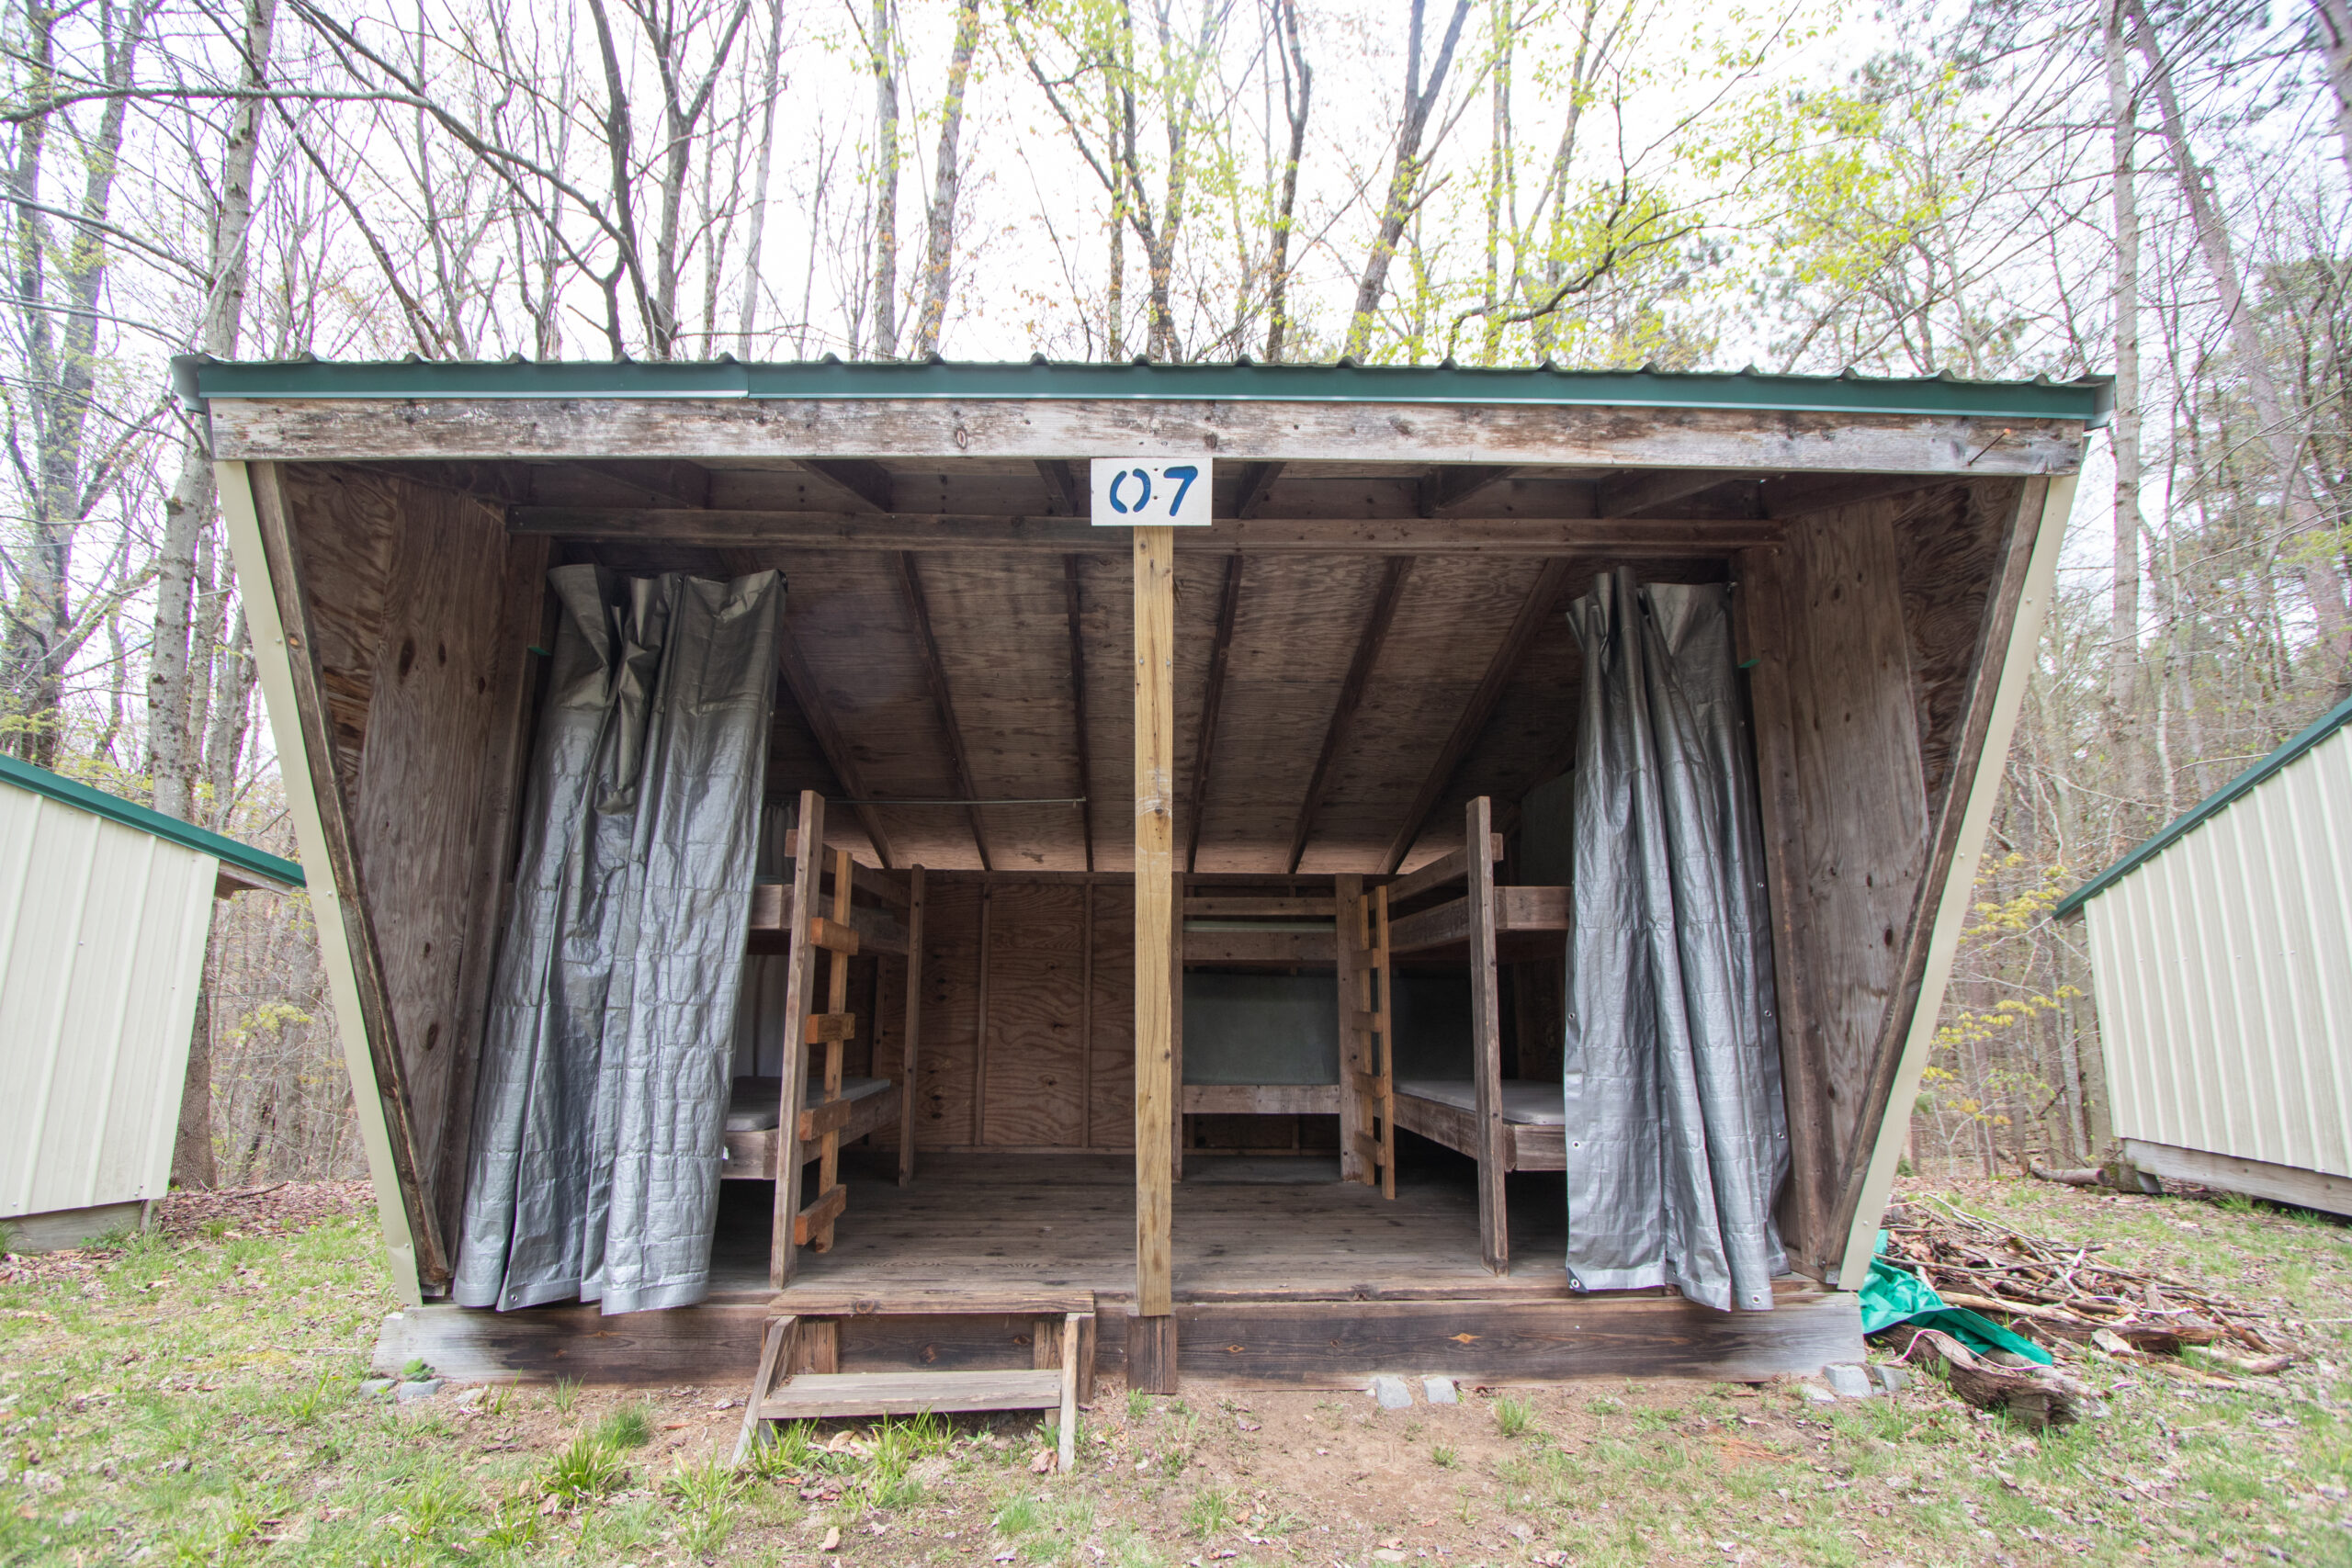 We have 17 of Lean-Tos scattered throughout our site, with 6 beds available each on a first-come, first-serve basis. Lean-Tos are popular for group encampments but also make excellent sleeping spaces during warmer months. Lean-Tos do not come with electricity or heating.